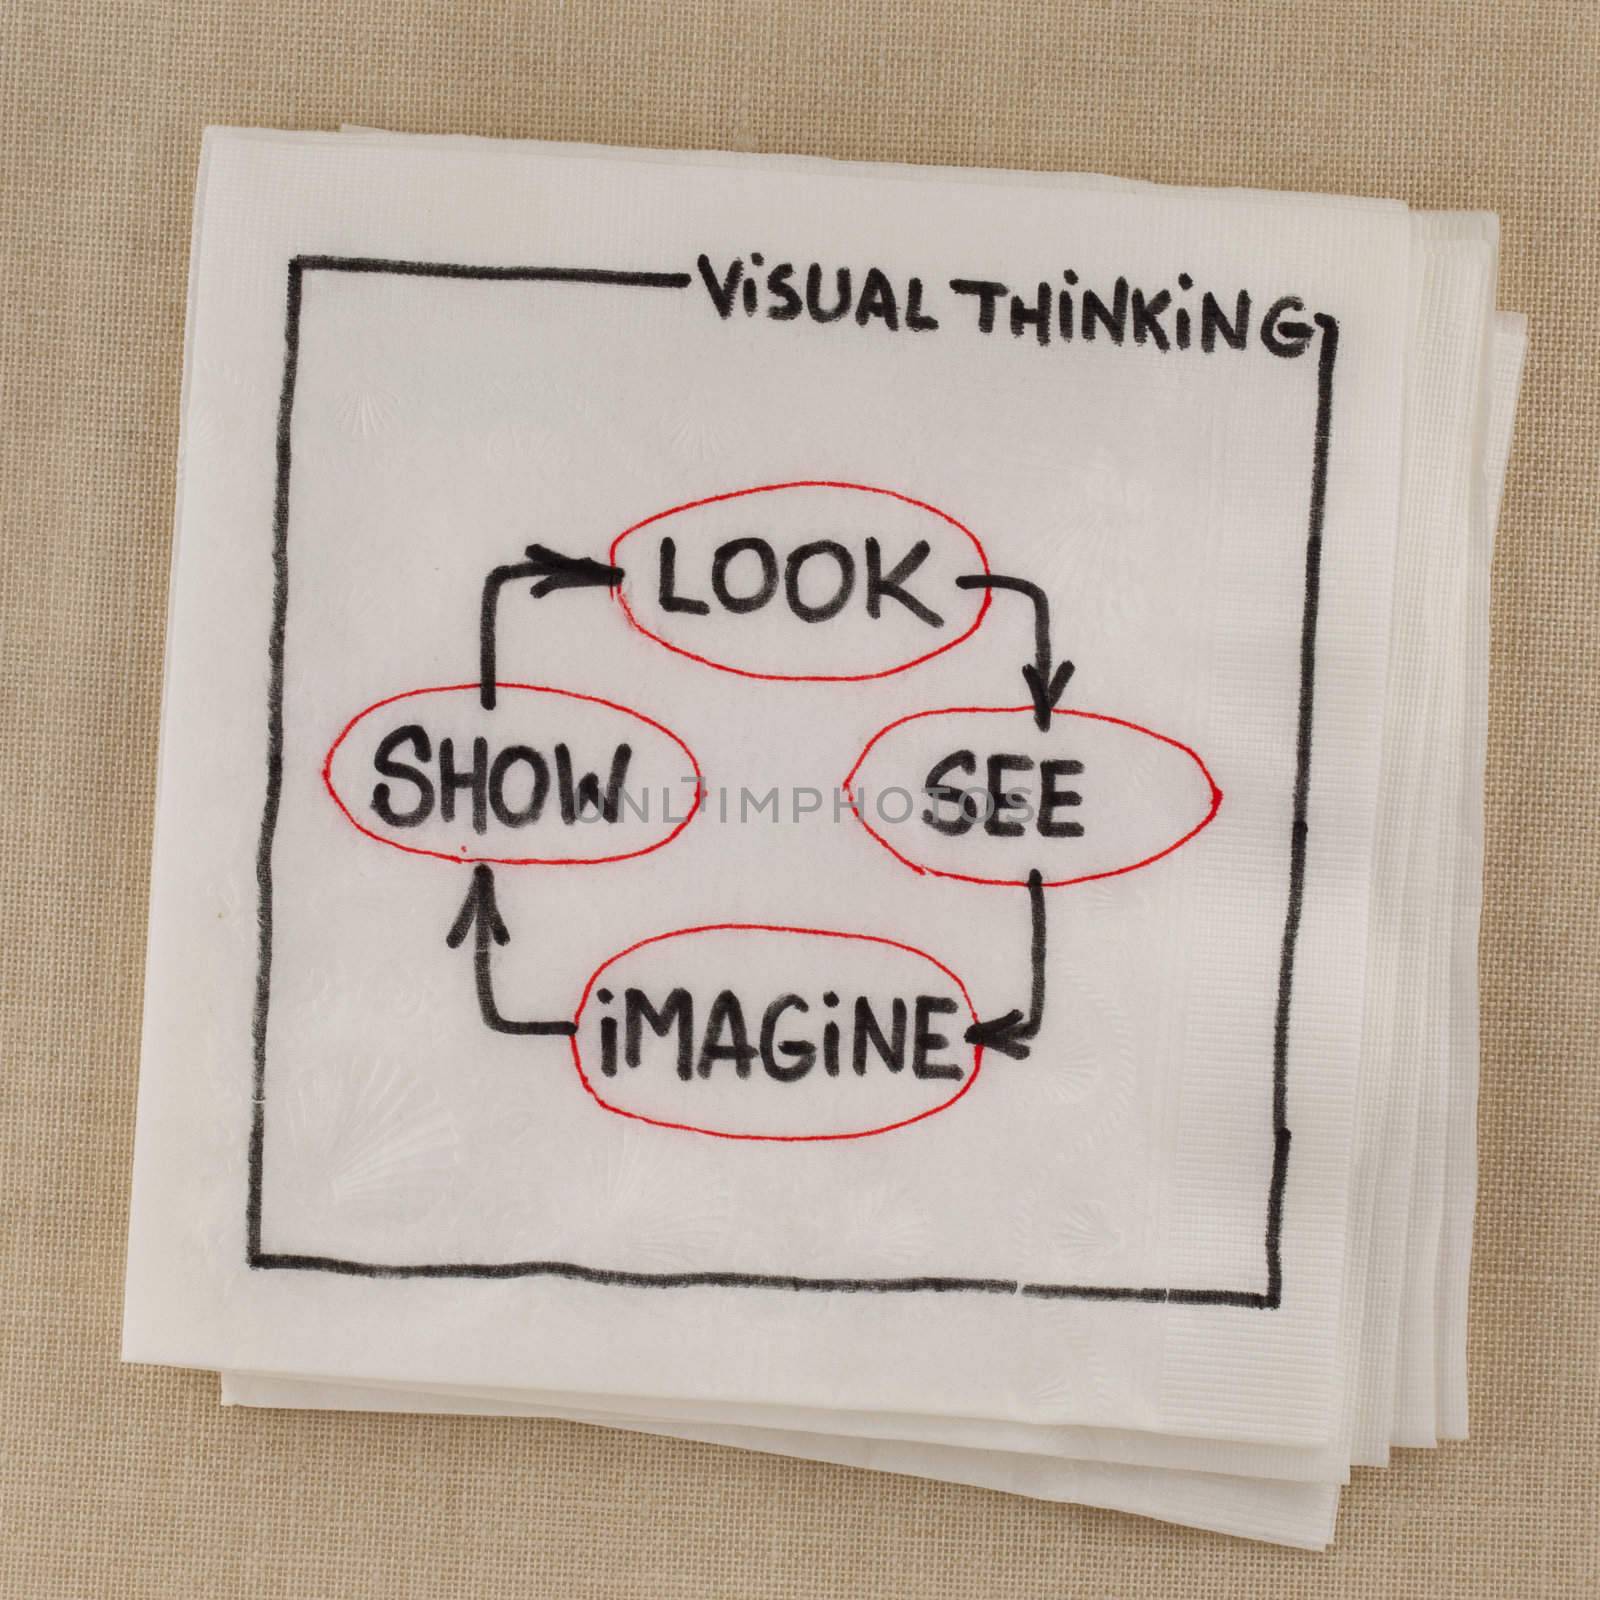 visual thinking concept by PixelsAway